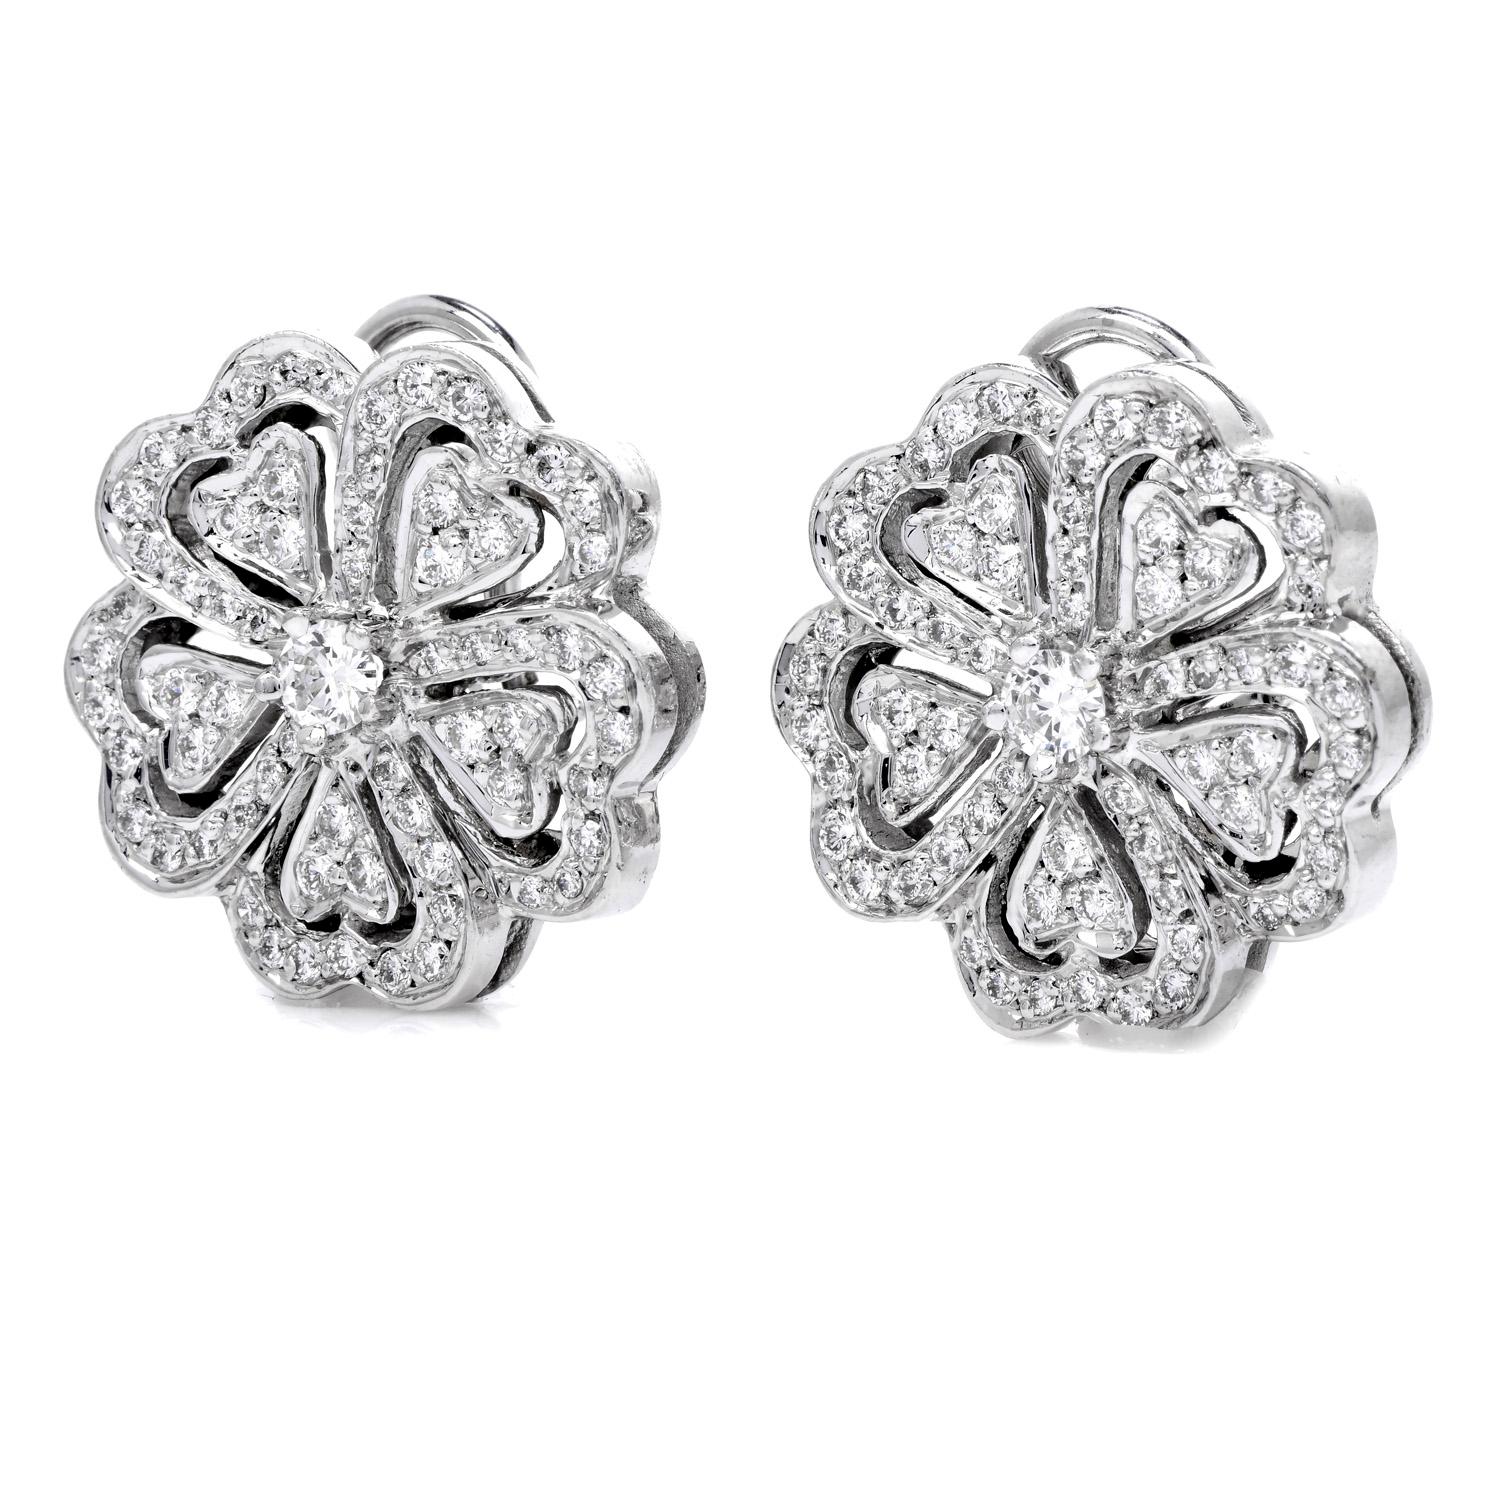 With a Ferris Wheel-inspired design these Vintage earrings were carefully crafted in platinum

Their two Center round cut diamonds weigh approx. 0.38 carat in total, G-H Color, VS1 Clarity Diamonds bring the sparkle and the love sensation towards